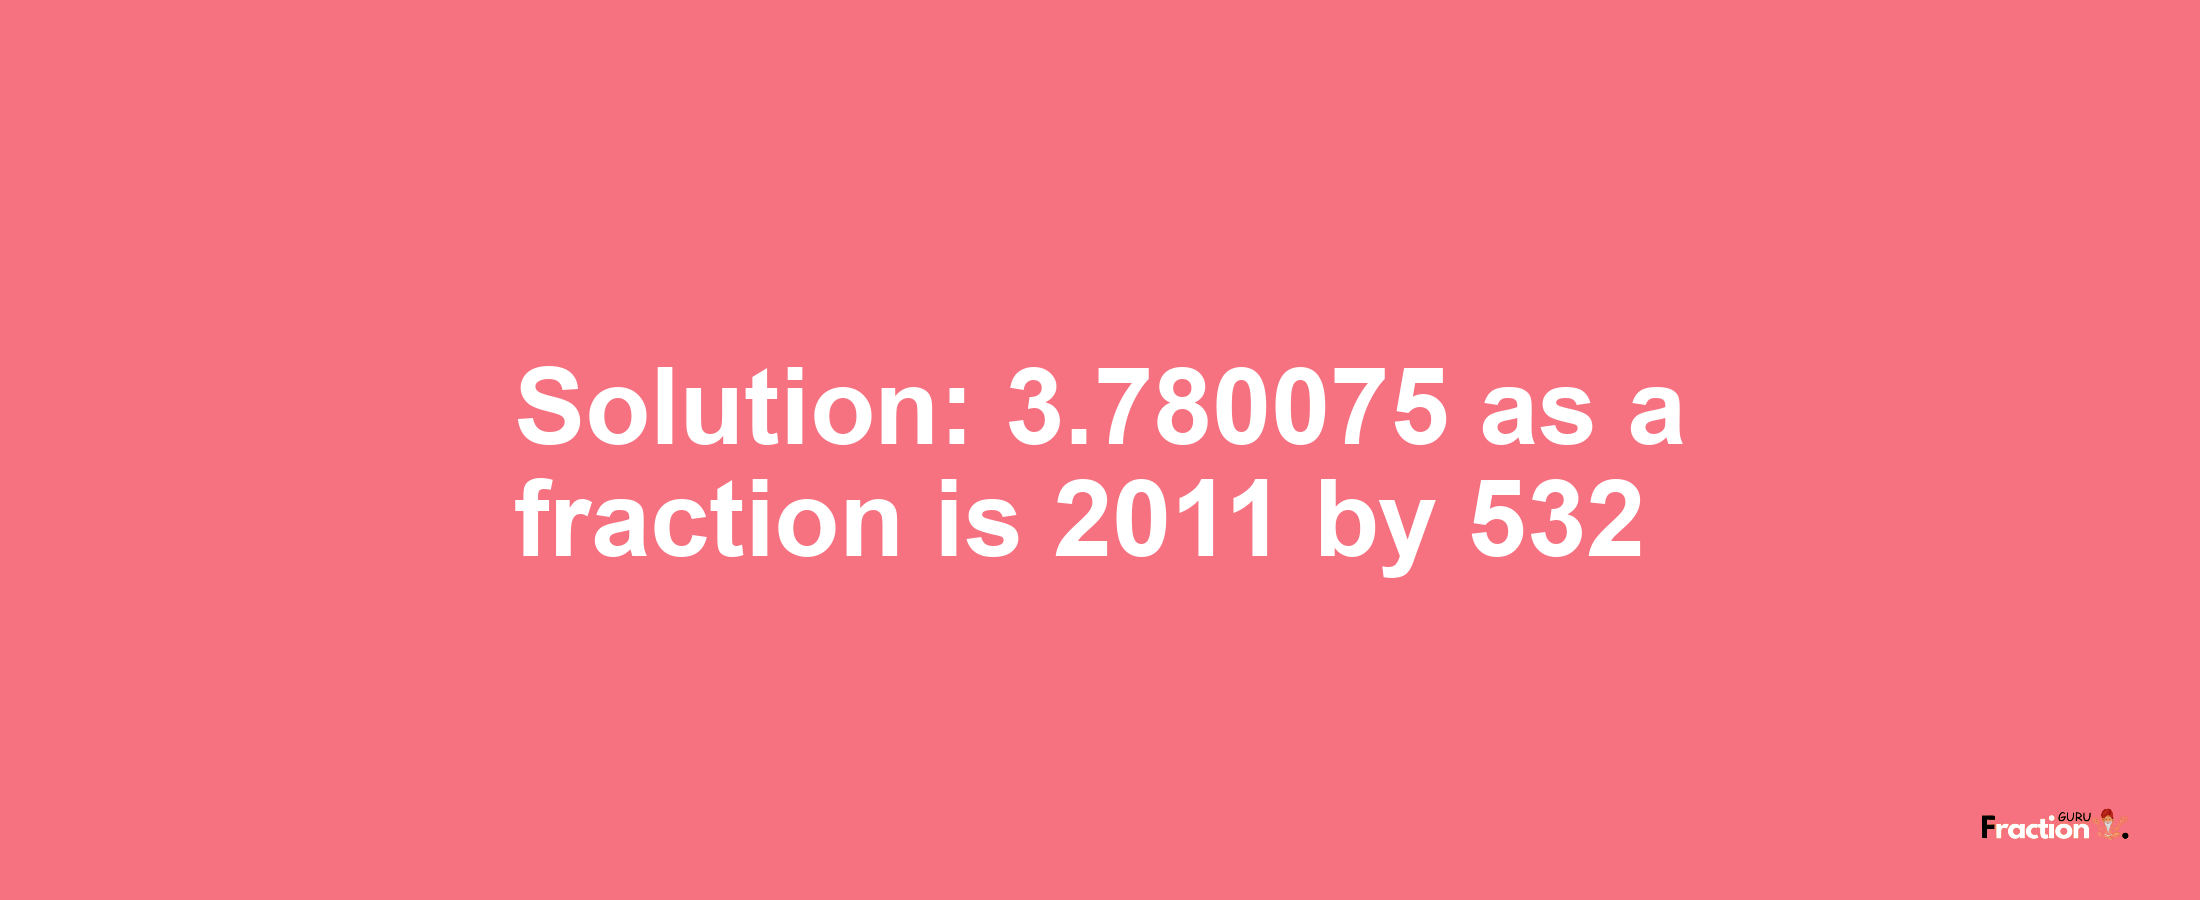 Solution:3.780075 as a fraction is 2011/532